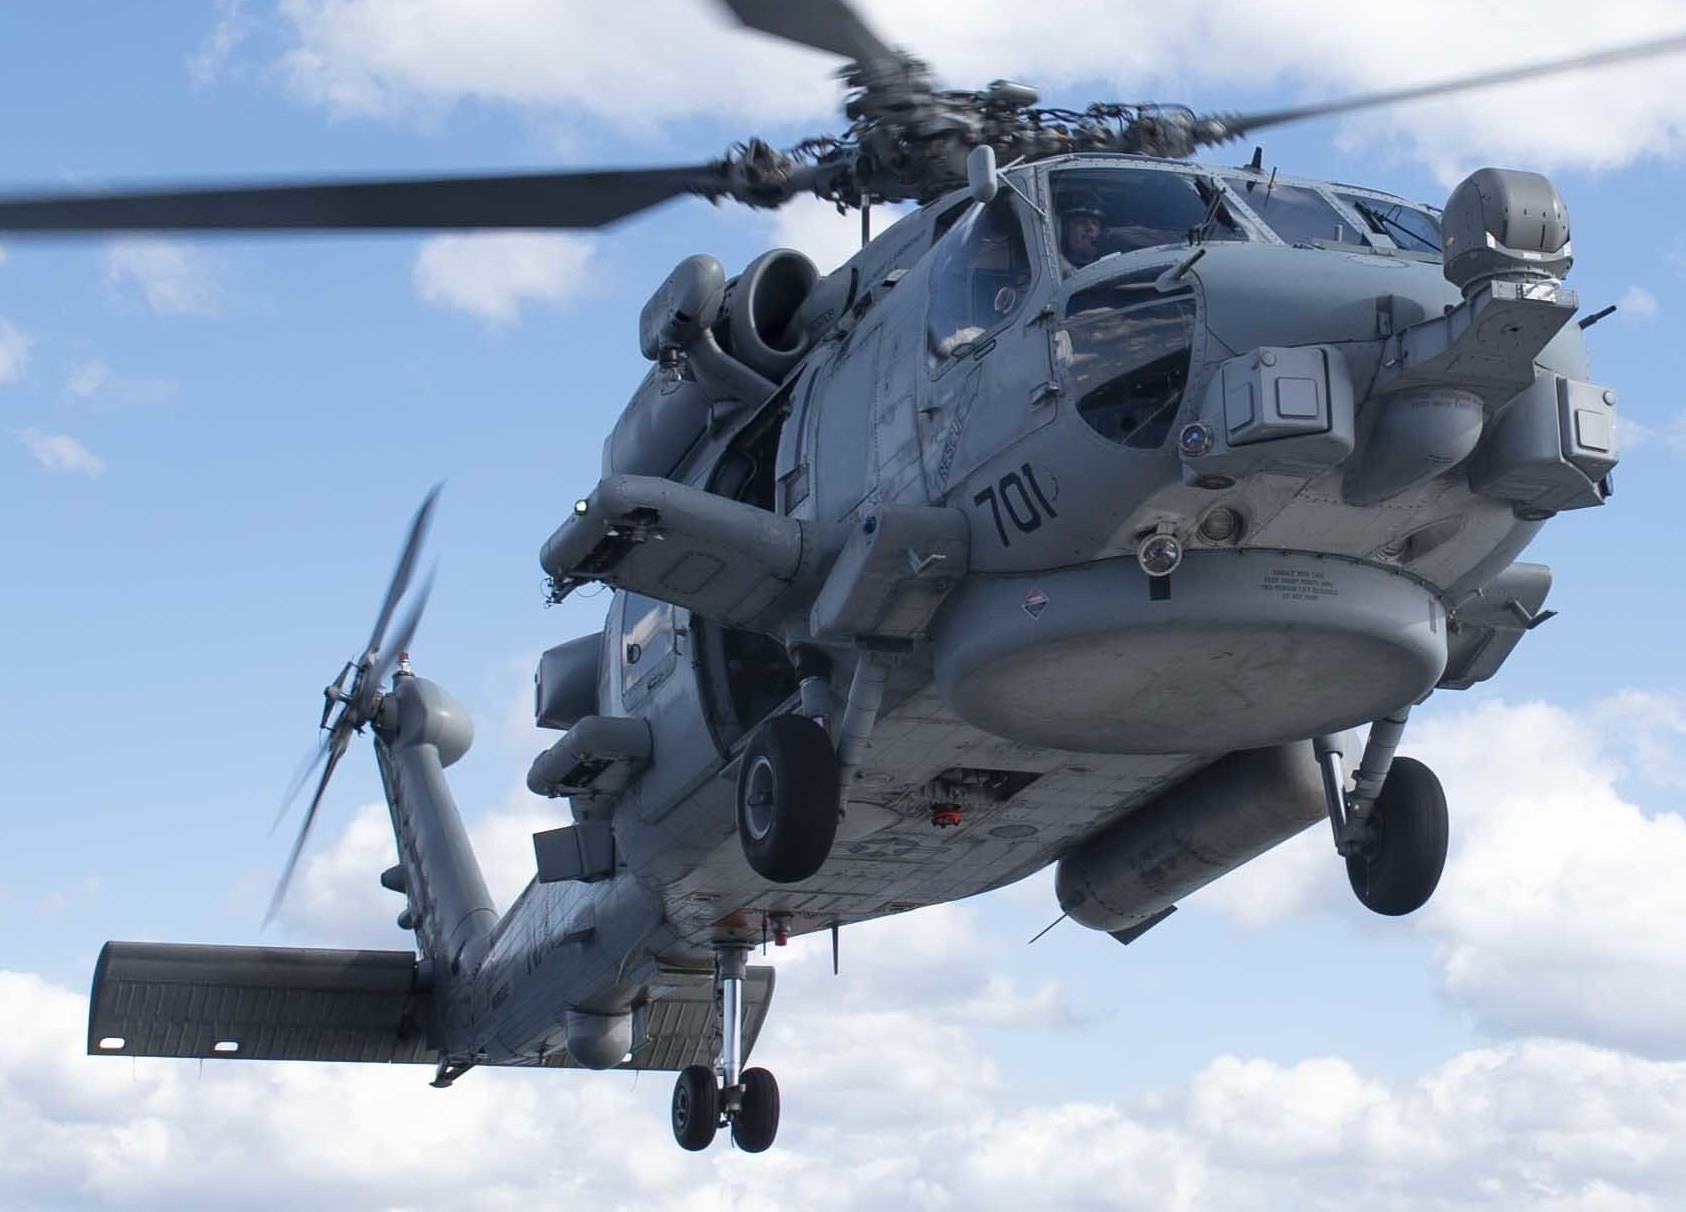 hsm-74 swamp foxes helicopter maritime strike squadron mh-60r seahawk ddg-57 uss mitscher 106